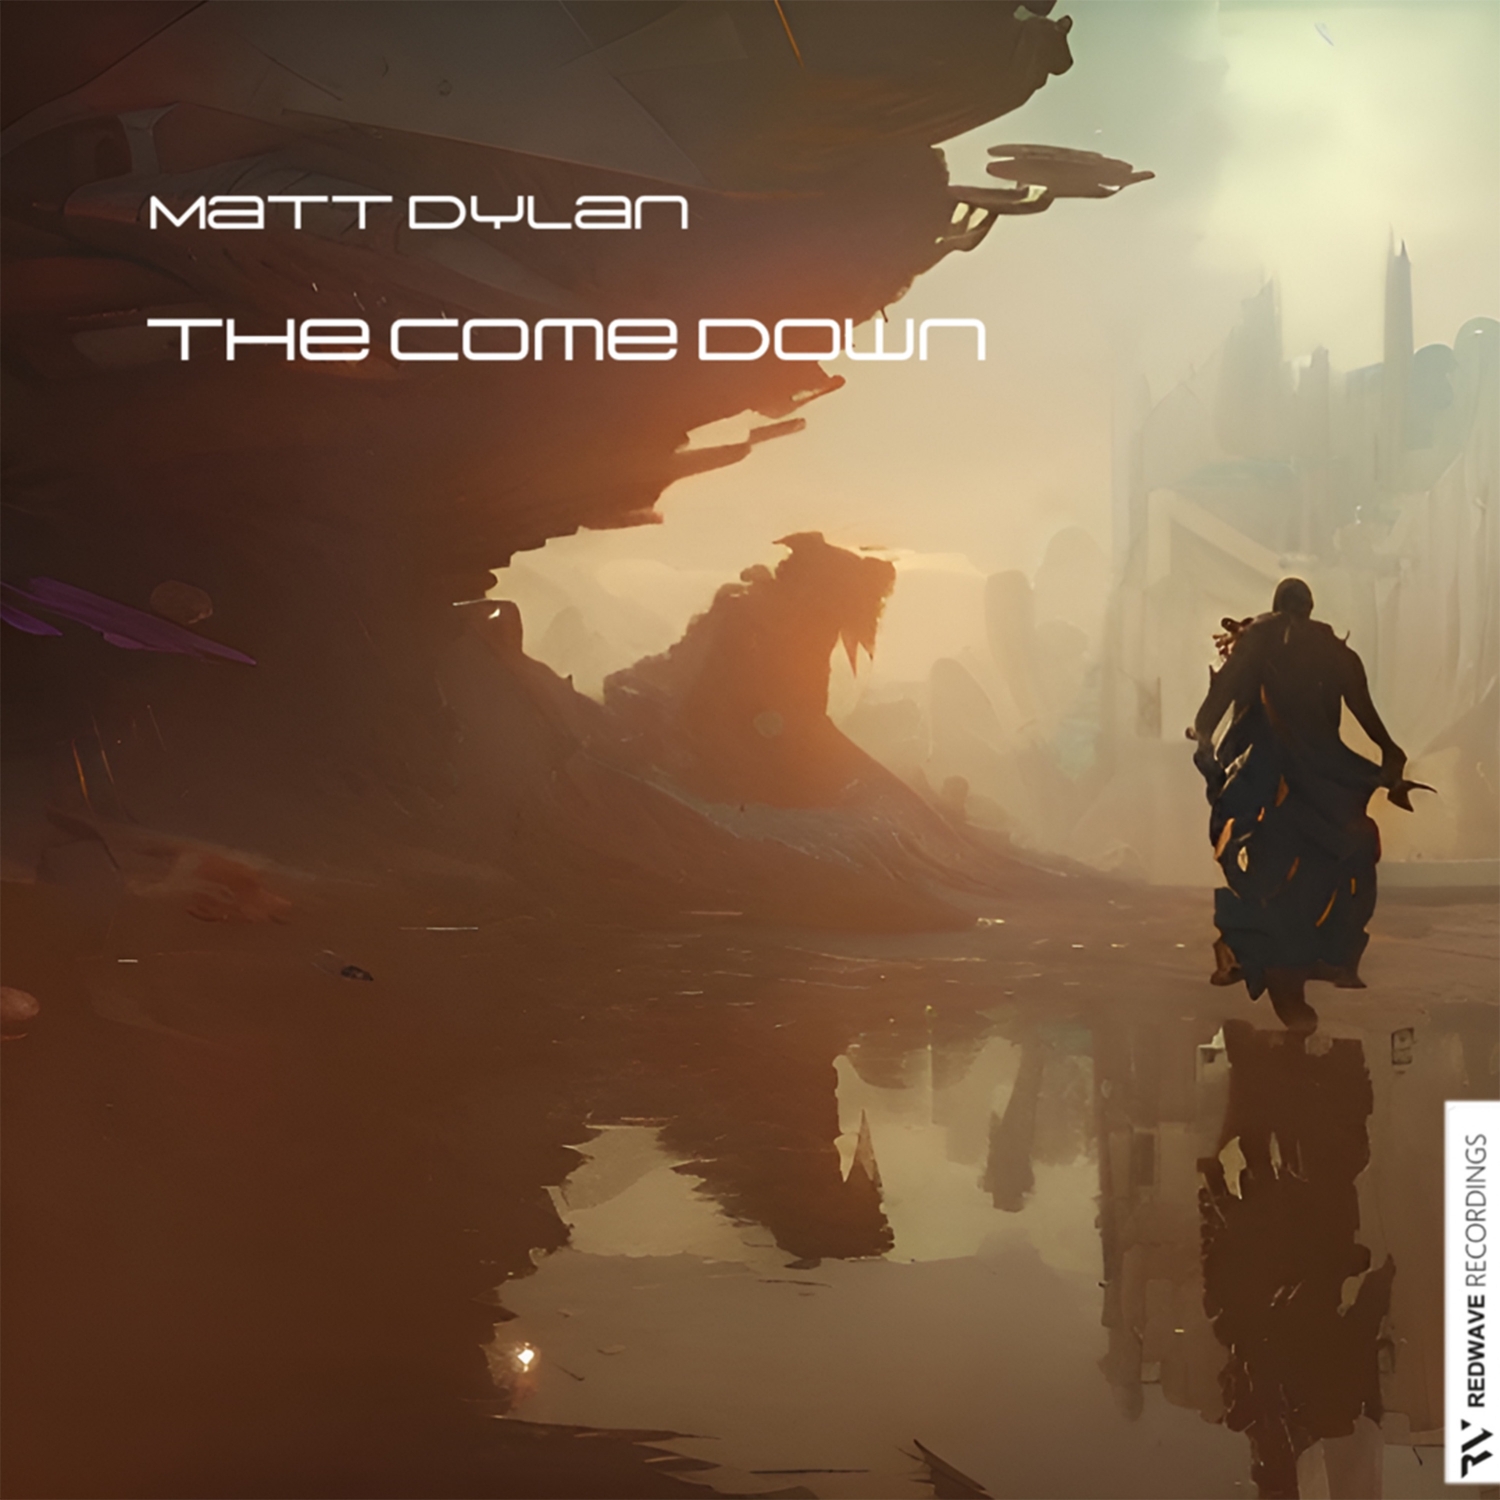 Matt Dylan presents The Come Down on Redwave Recordings